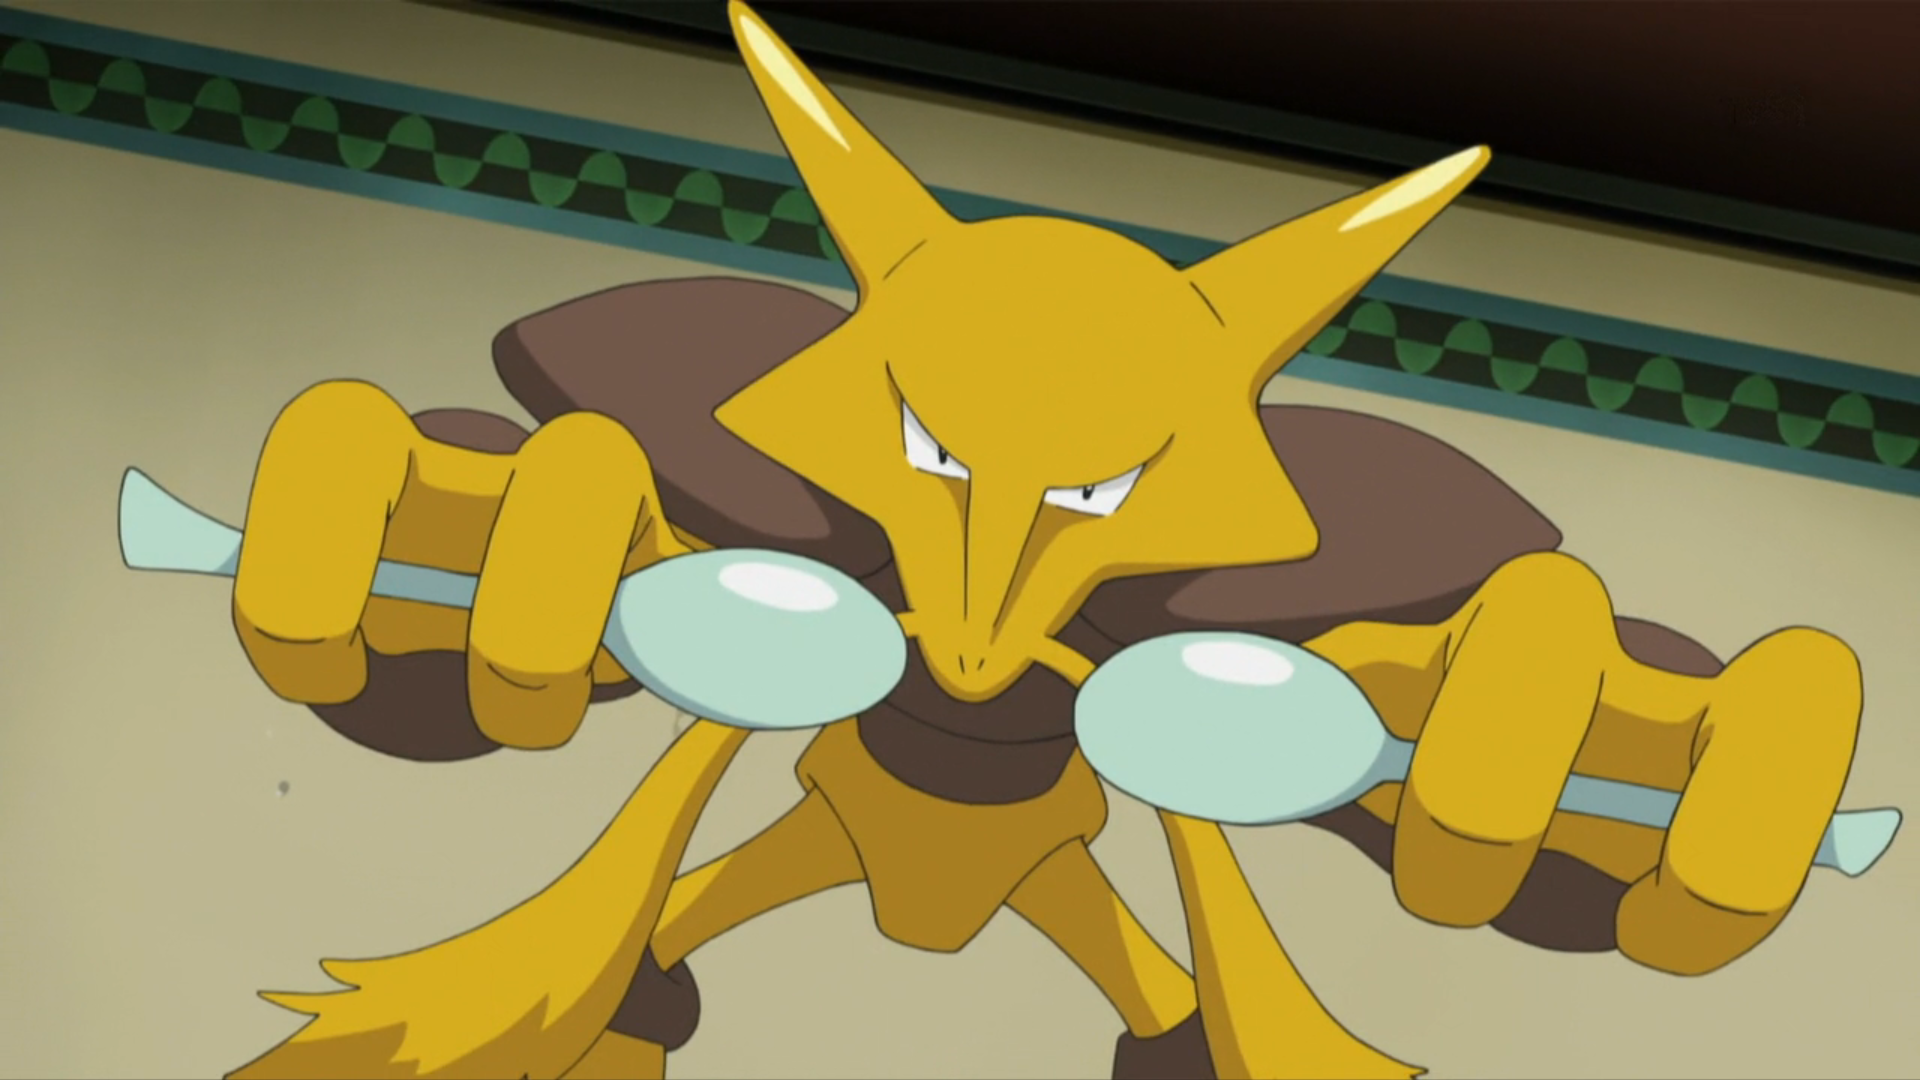 Pokémon GO - Did you know? By closing both its eyes, Alakazam can heighten  all its other senses. 👁️👁️ This enables it to use its abilities to their  extremes. 🤯 When we